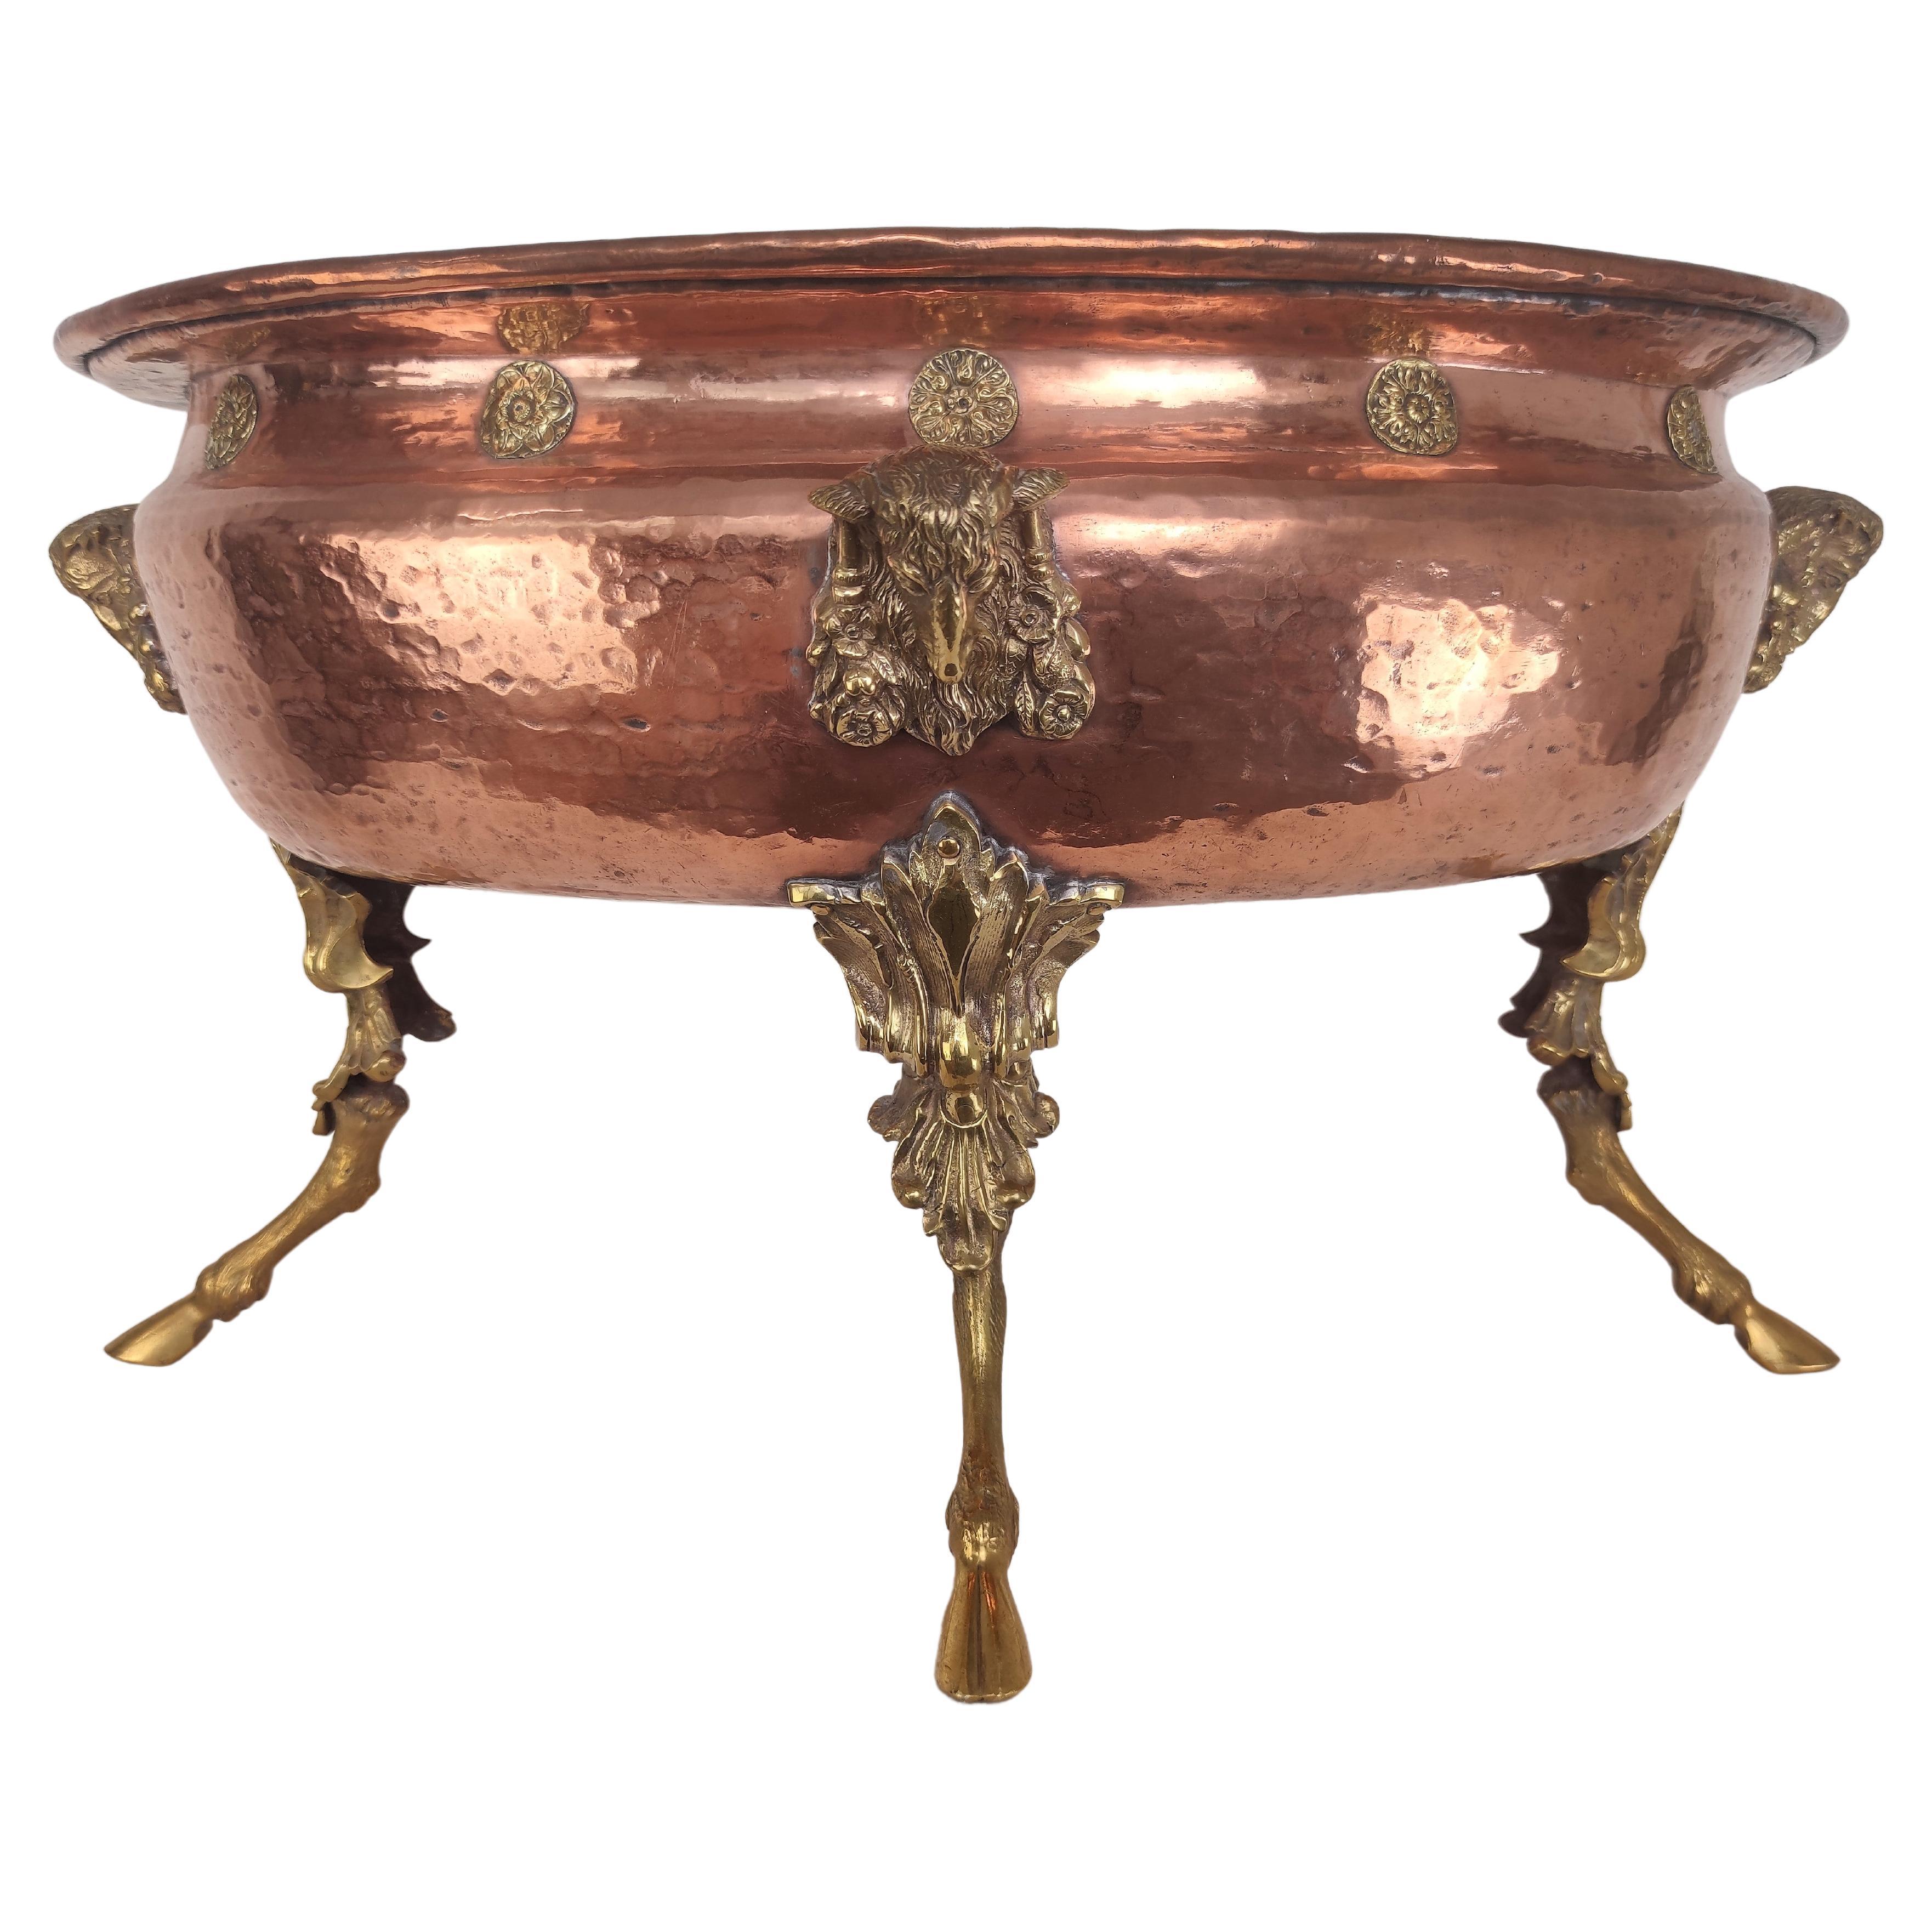 18th Century Italian Huge Party Brass Copper Champagne Wine Cooler Ice Holder